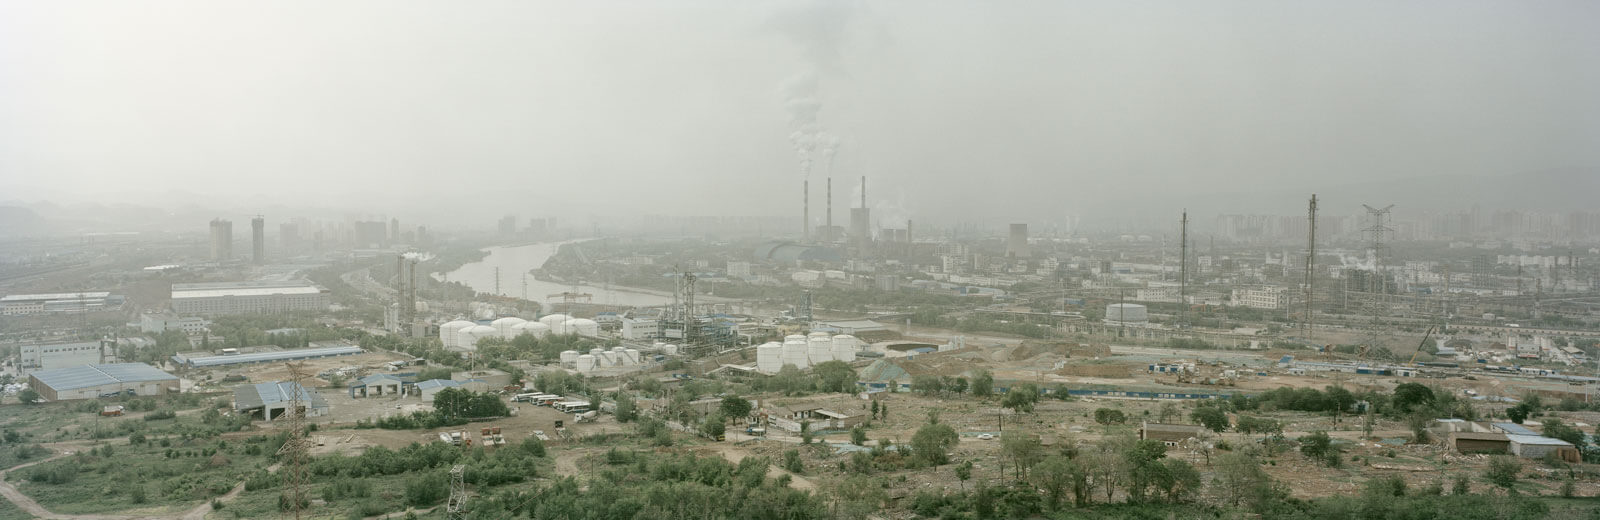 A wide view of the city of Lanzhou, which is very industrial with a hazy sky.